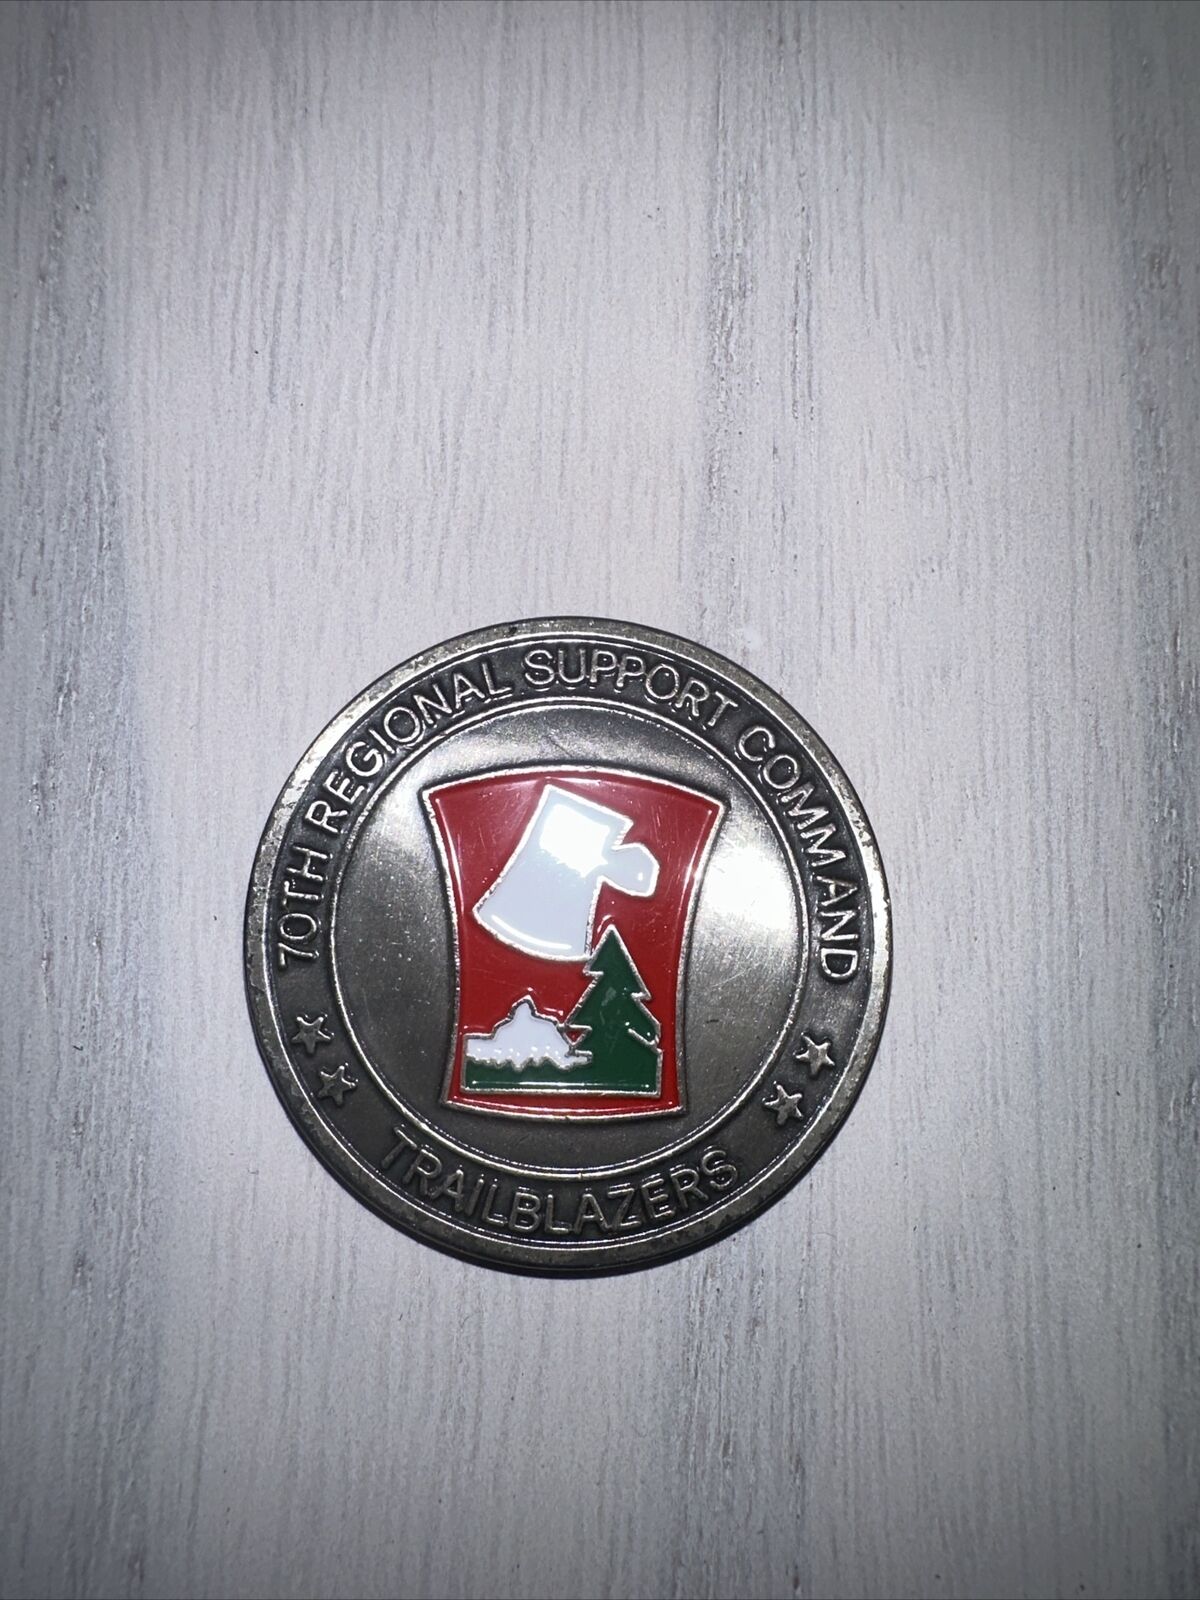 70th Regional Support Command Commanding General Challenge Coin For Retention